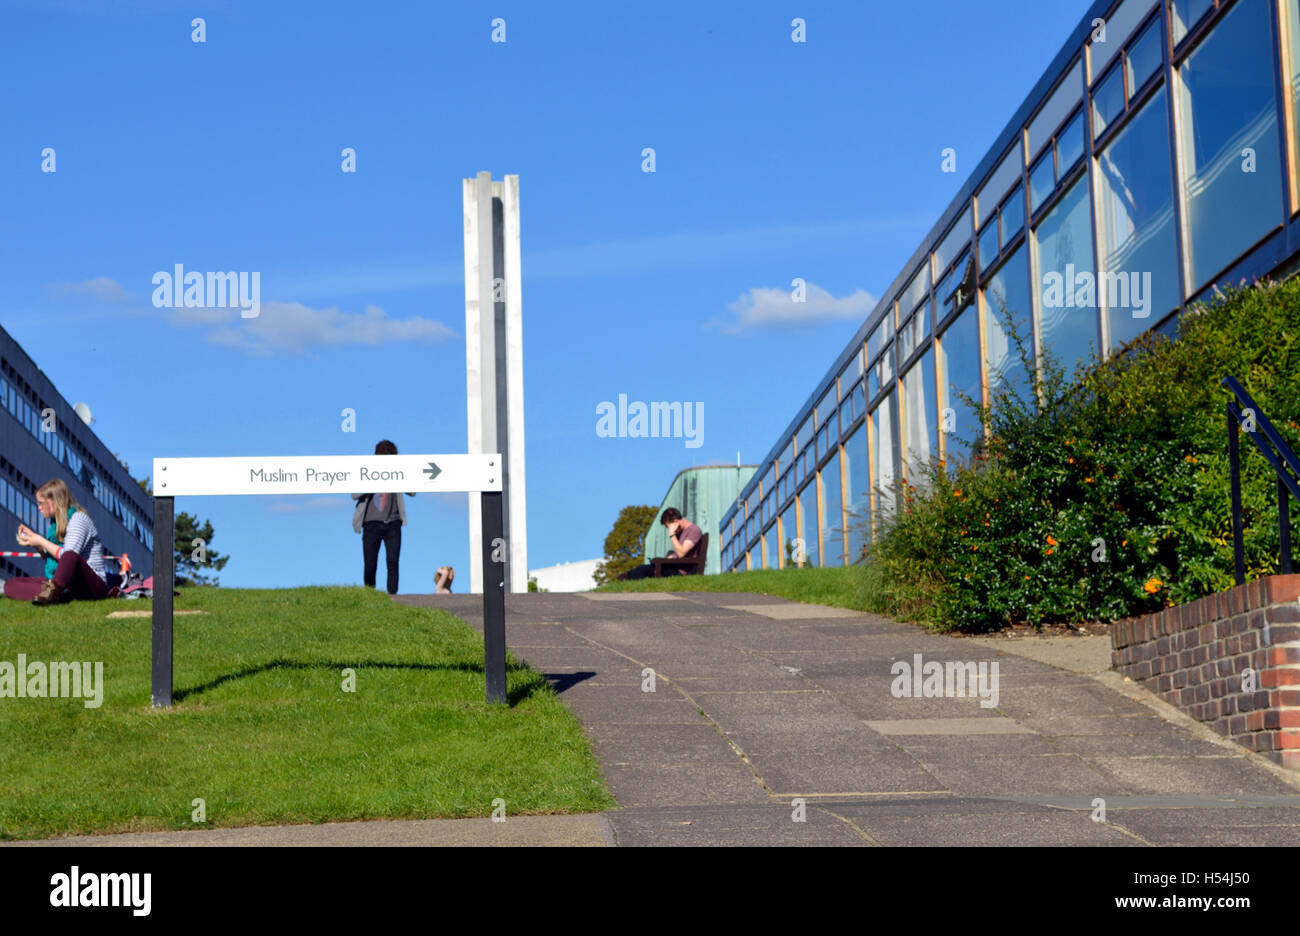 A sign with directions to the Muslim prayer room at the University of Southampton Highfield Campus, UK. Stock Photo